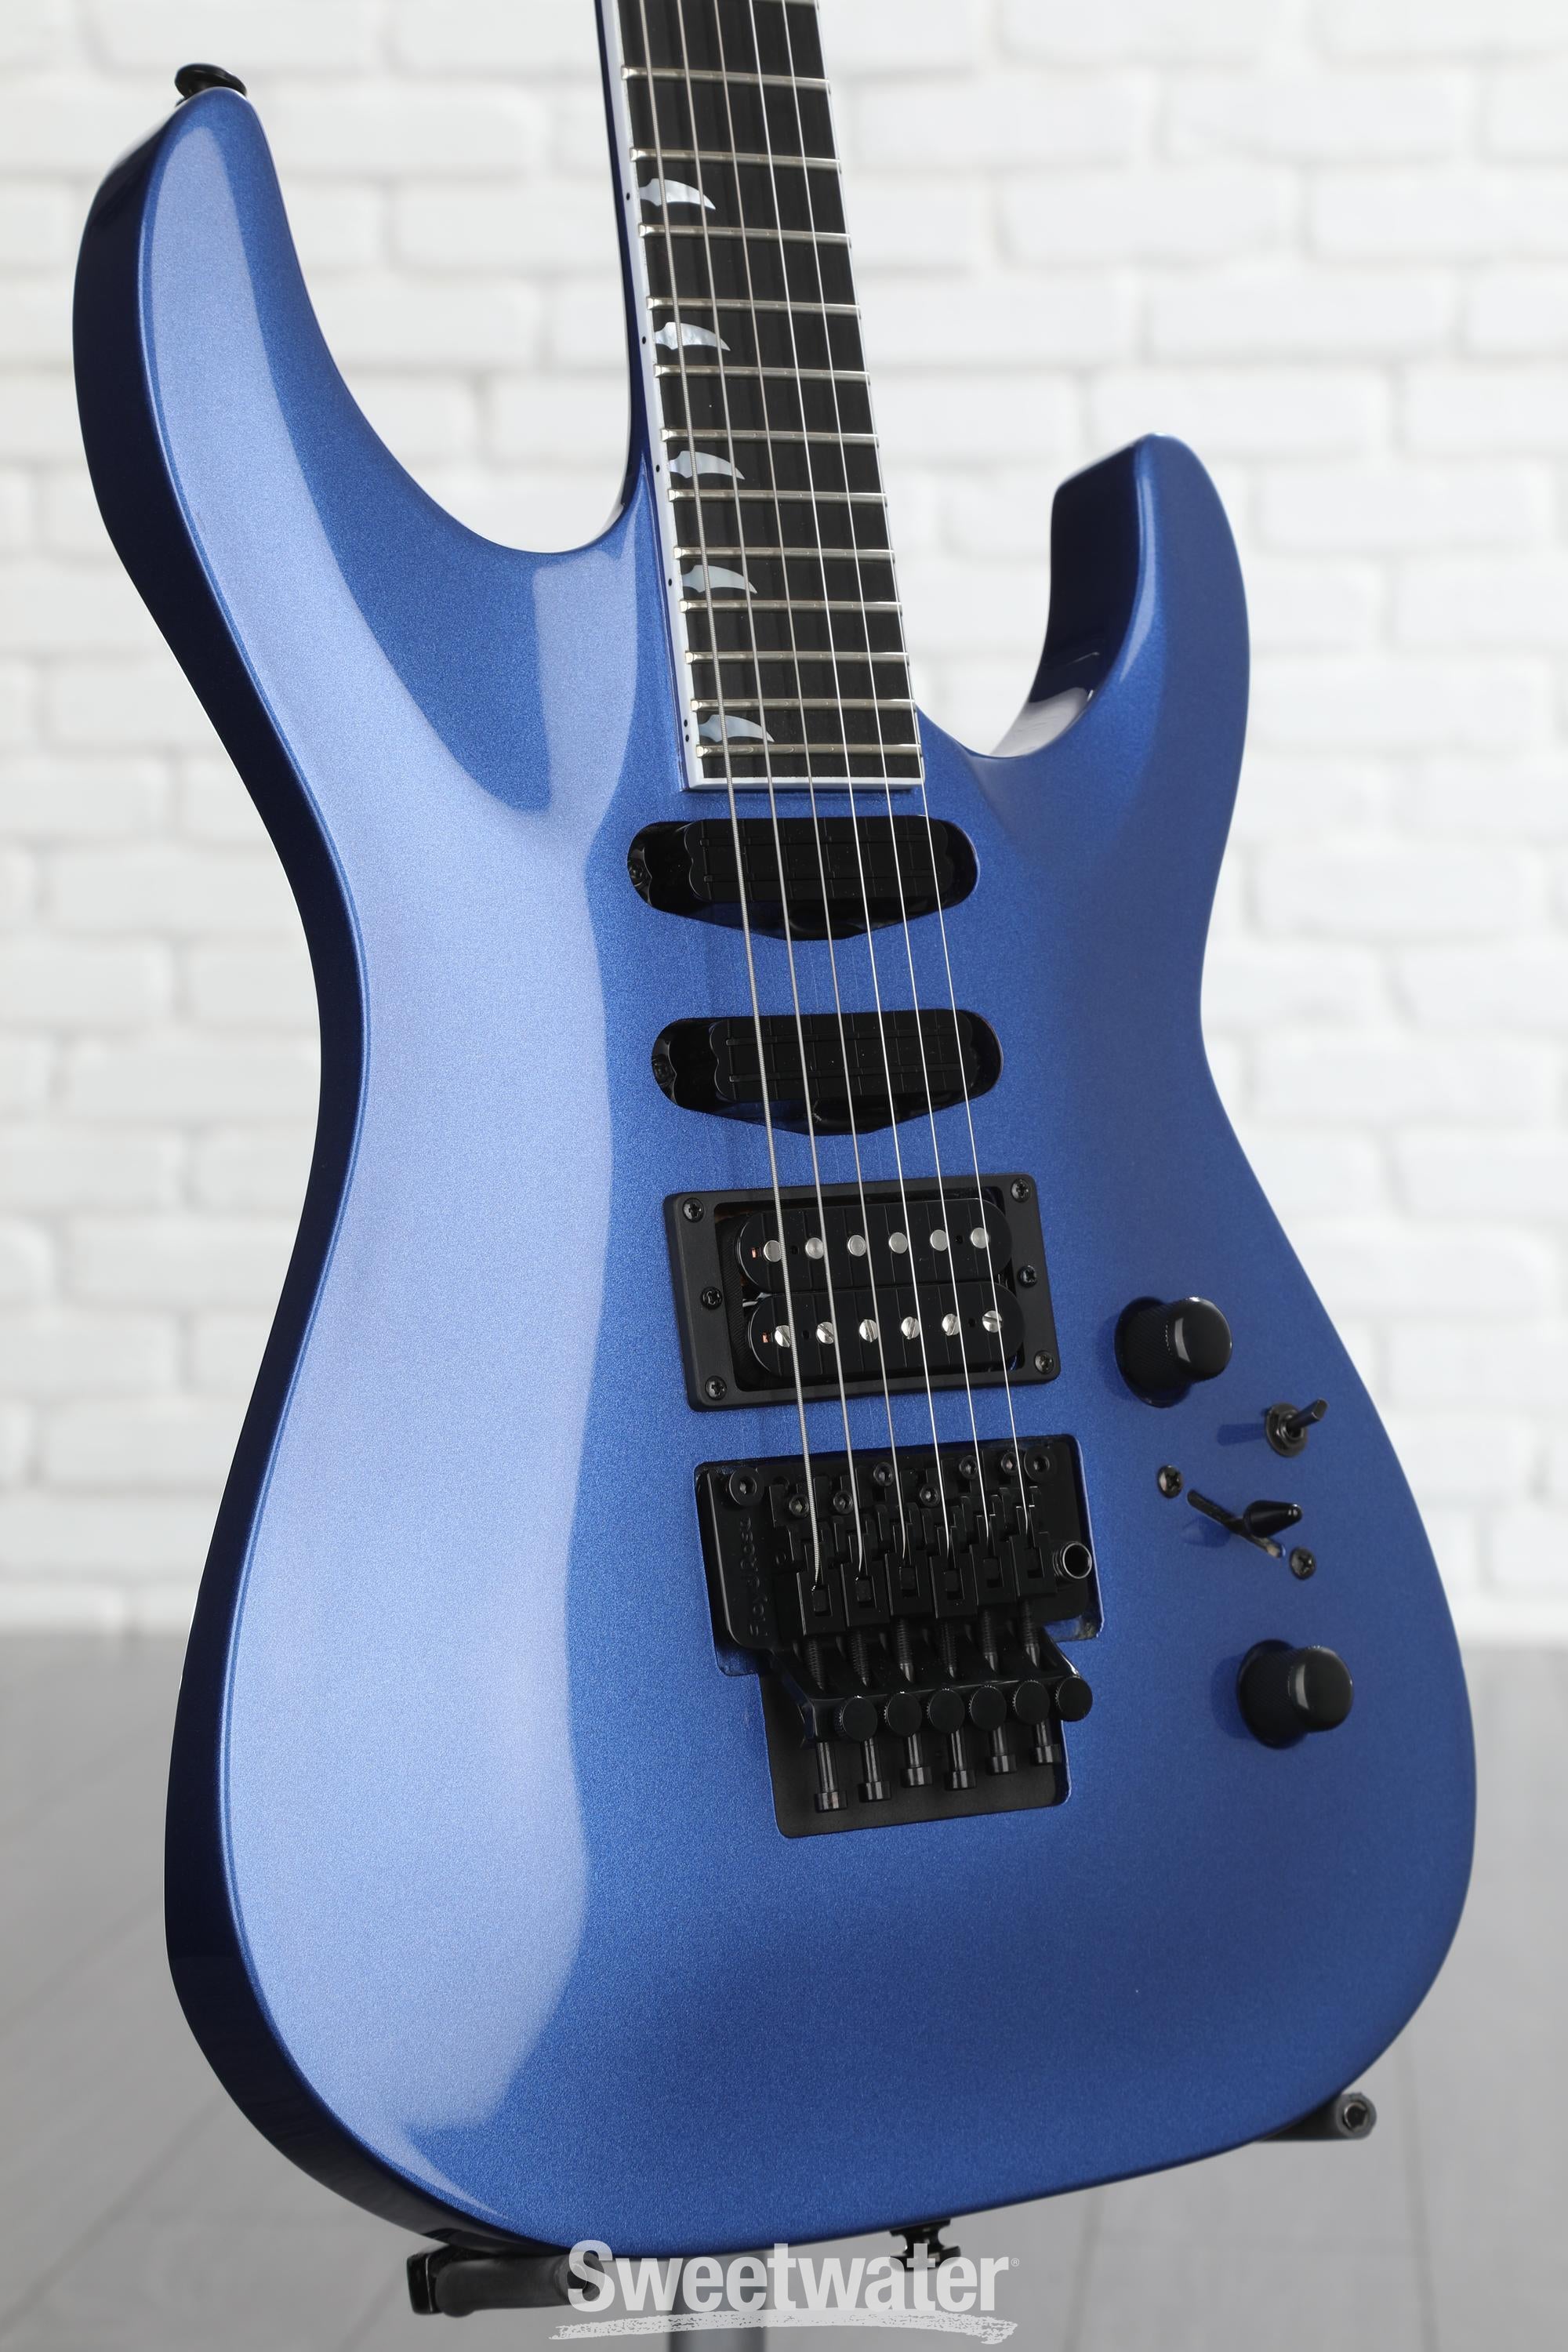 Kramer SM-1 Electric Guitar - Candy Blue | Sweetwater